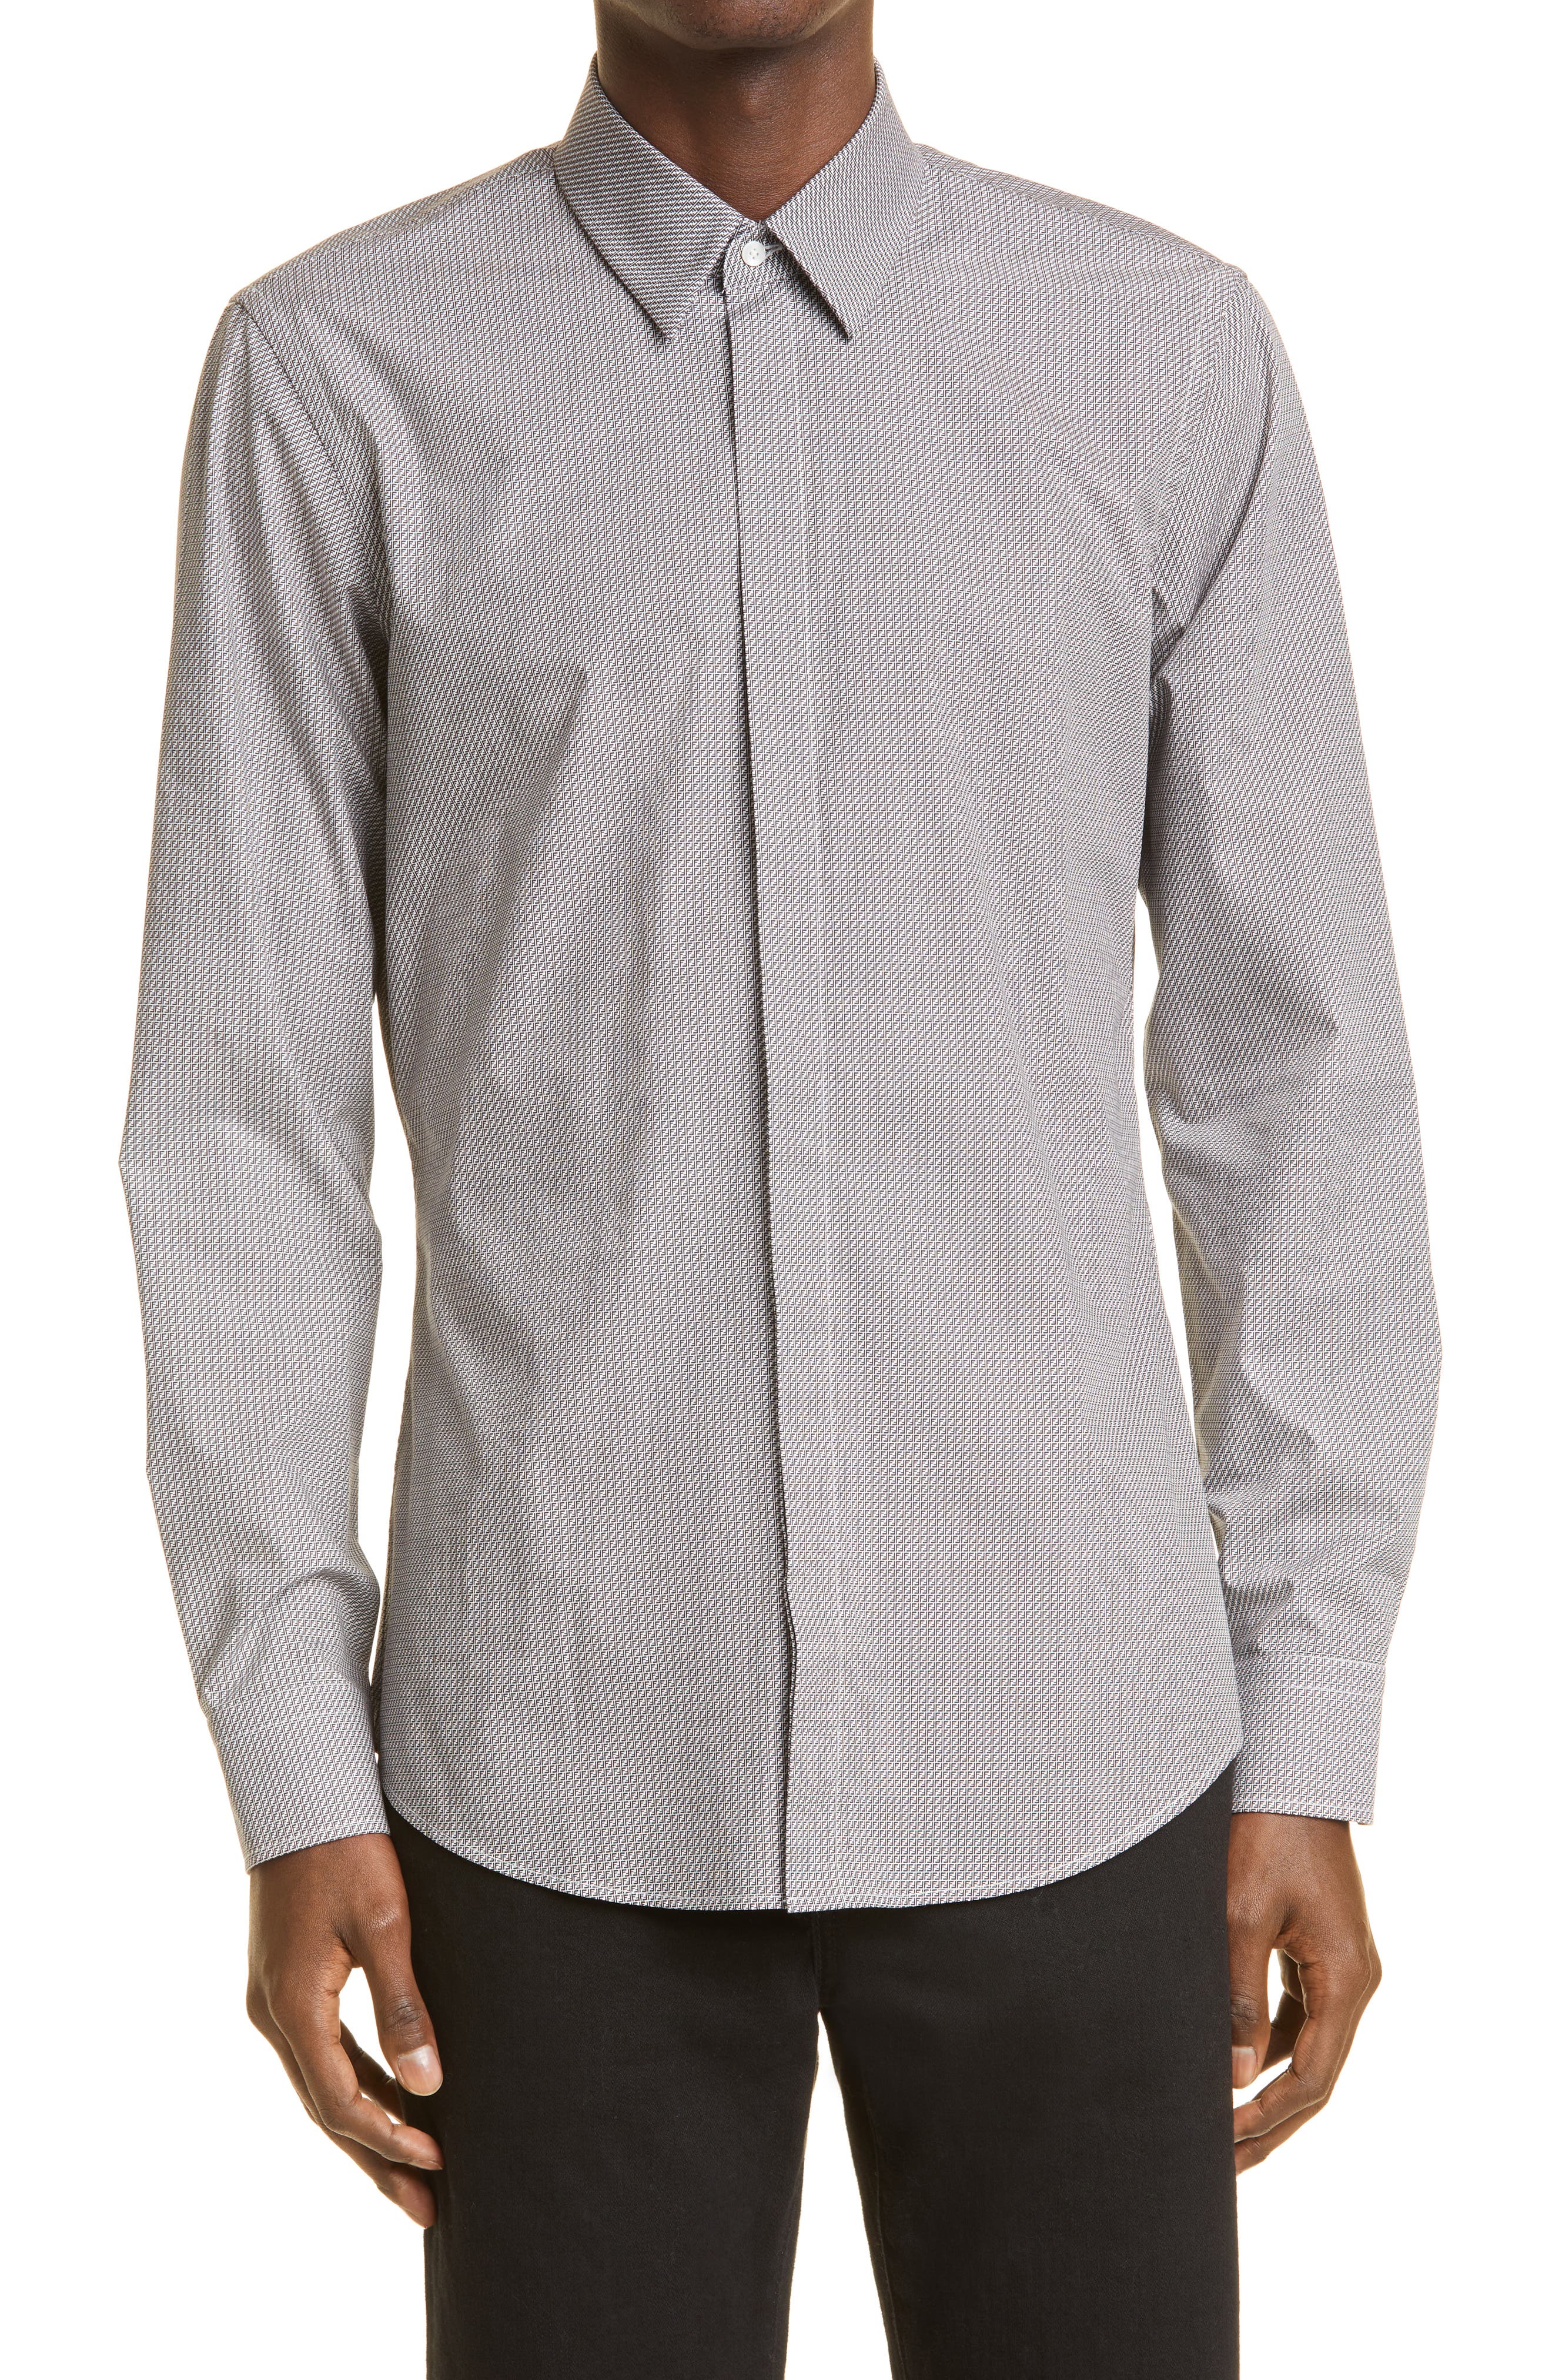 Fendi Micro FF Long Sleeve Button-Up Cotton Shirt in White/Black at Nordstrom, Size 39 Eu